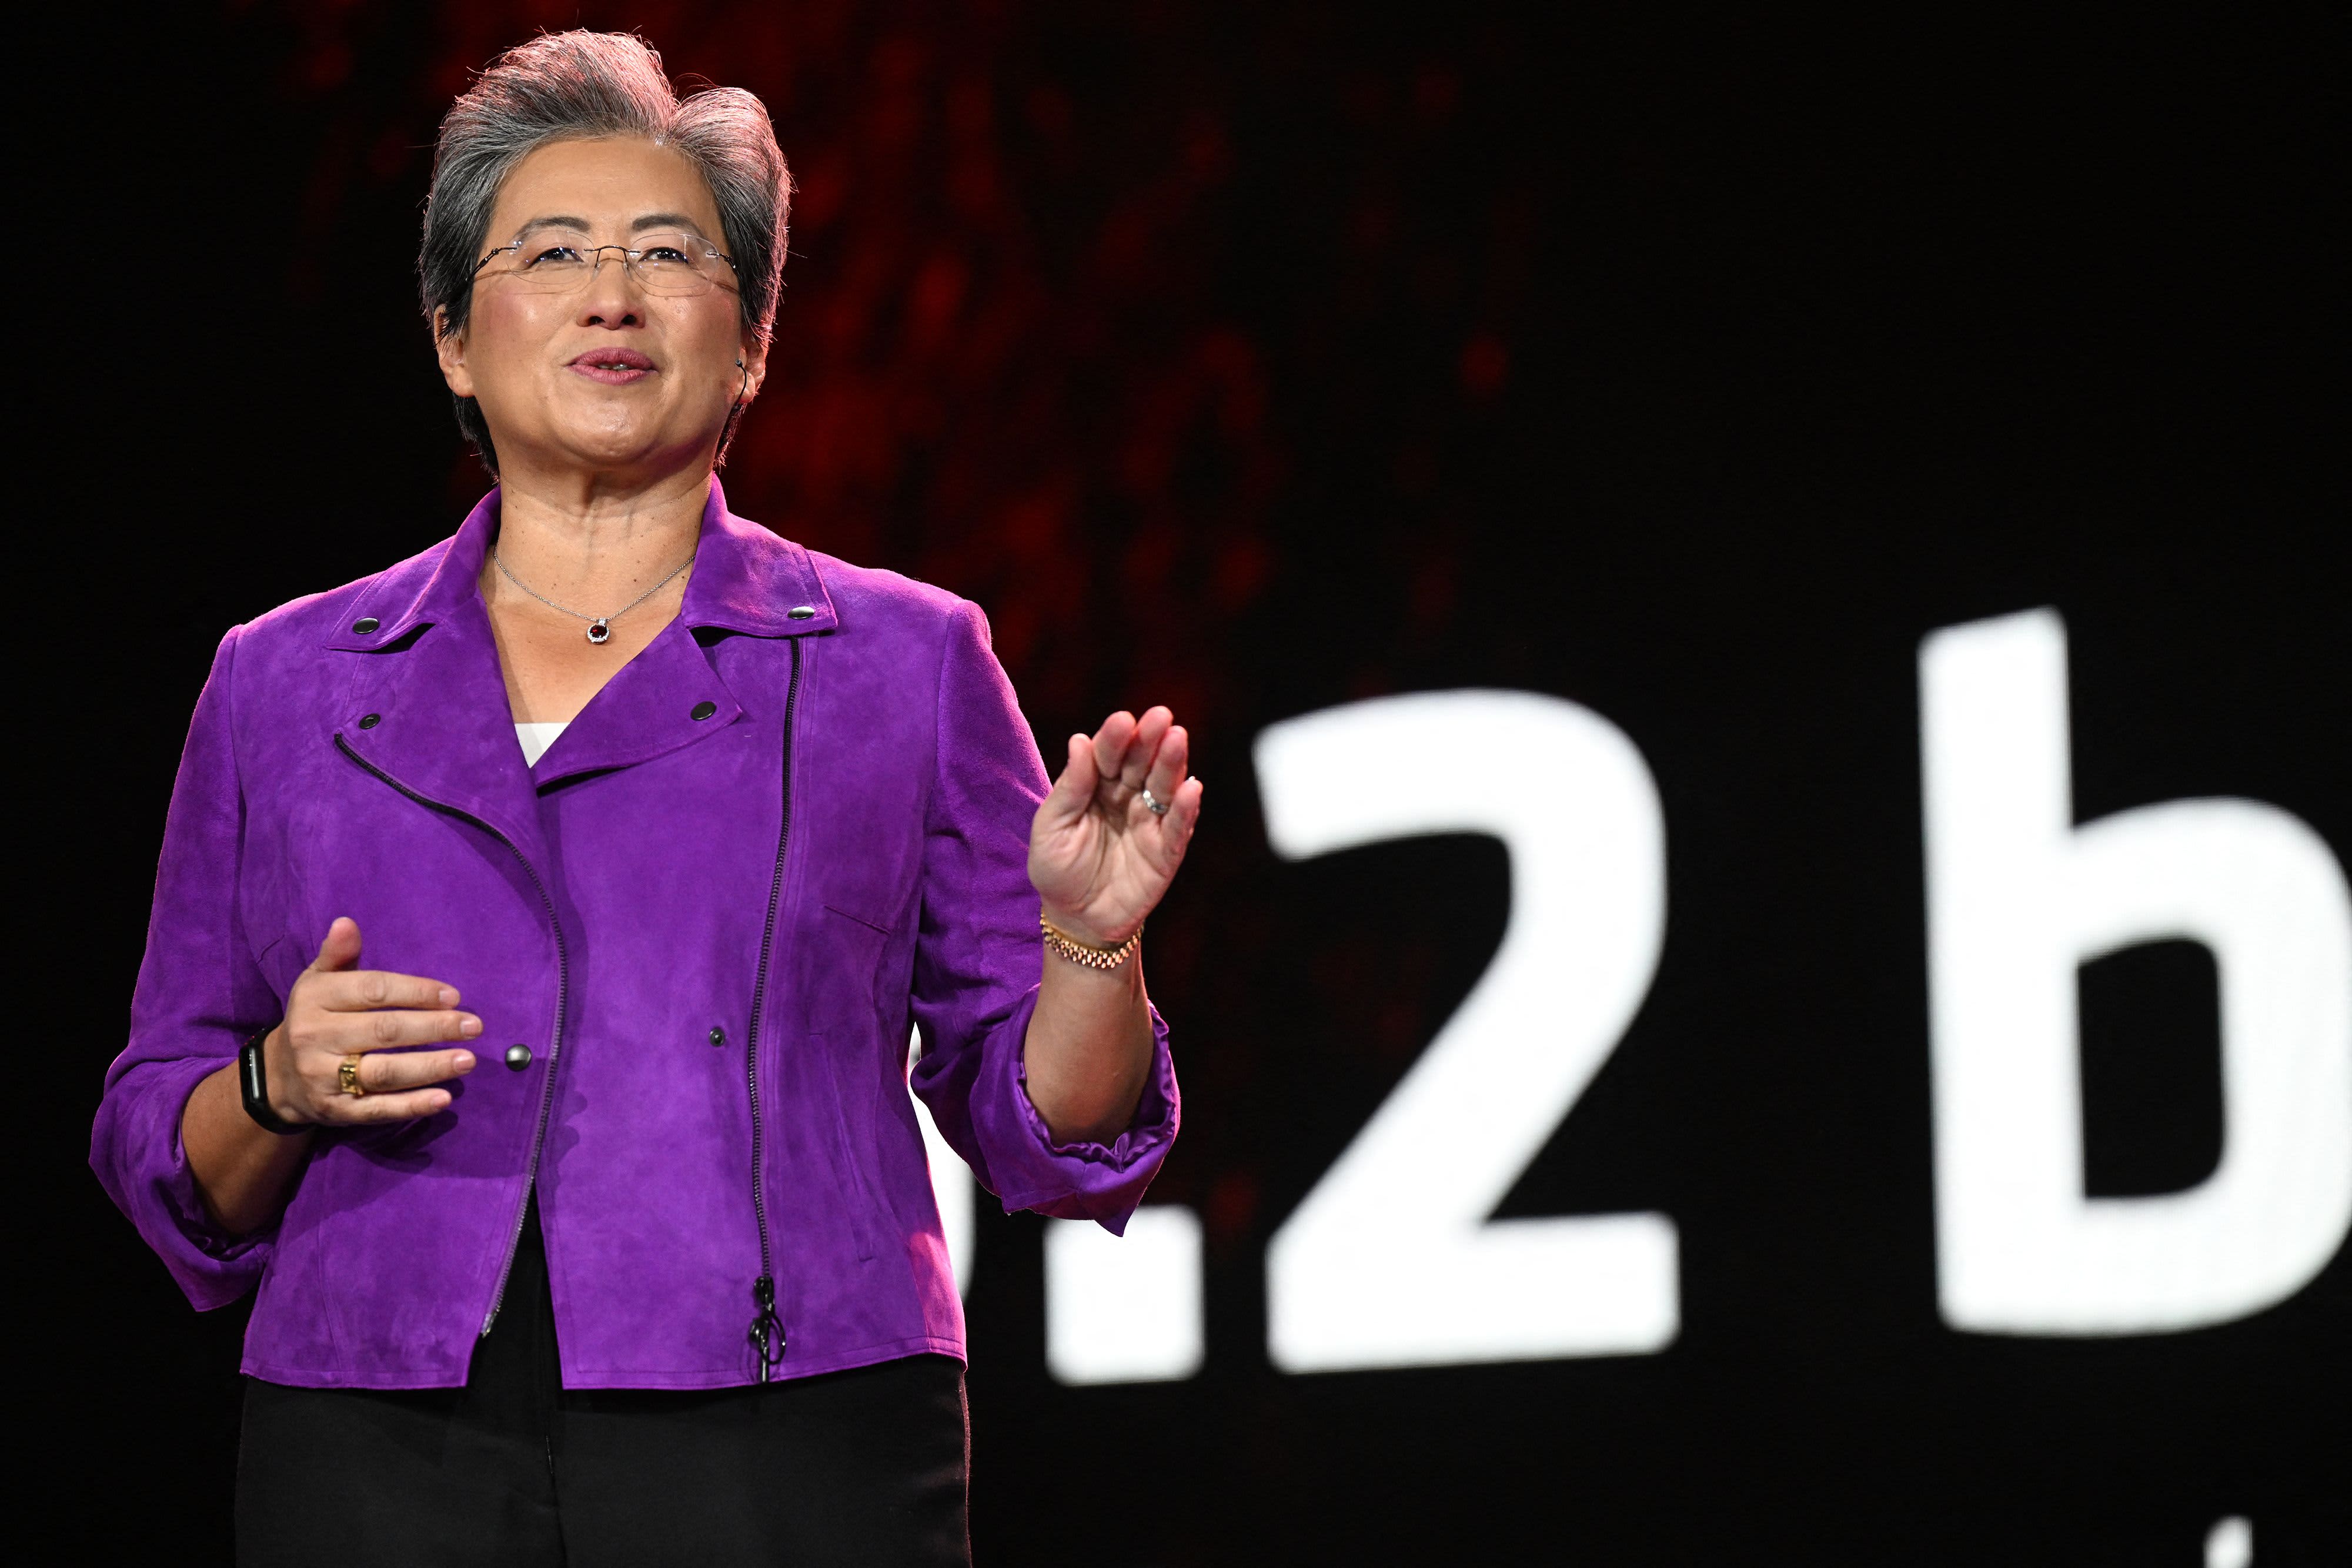 Wall Street looks past AMD's light guide, leading us to make a price target change